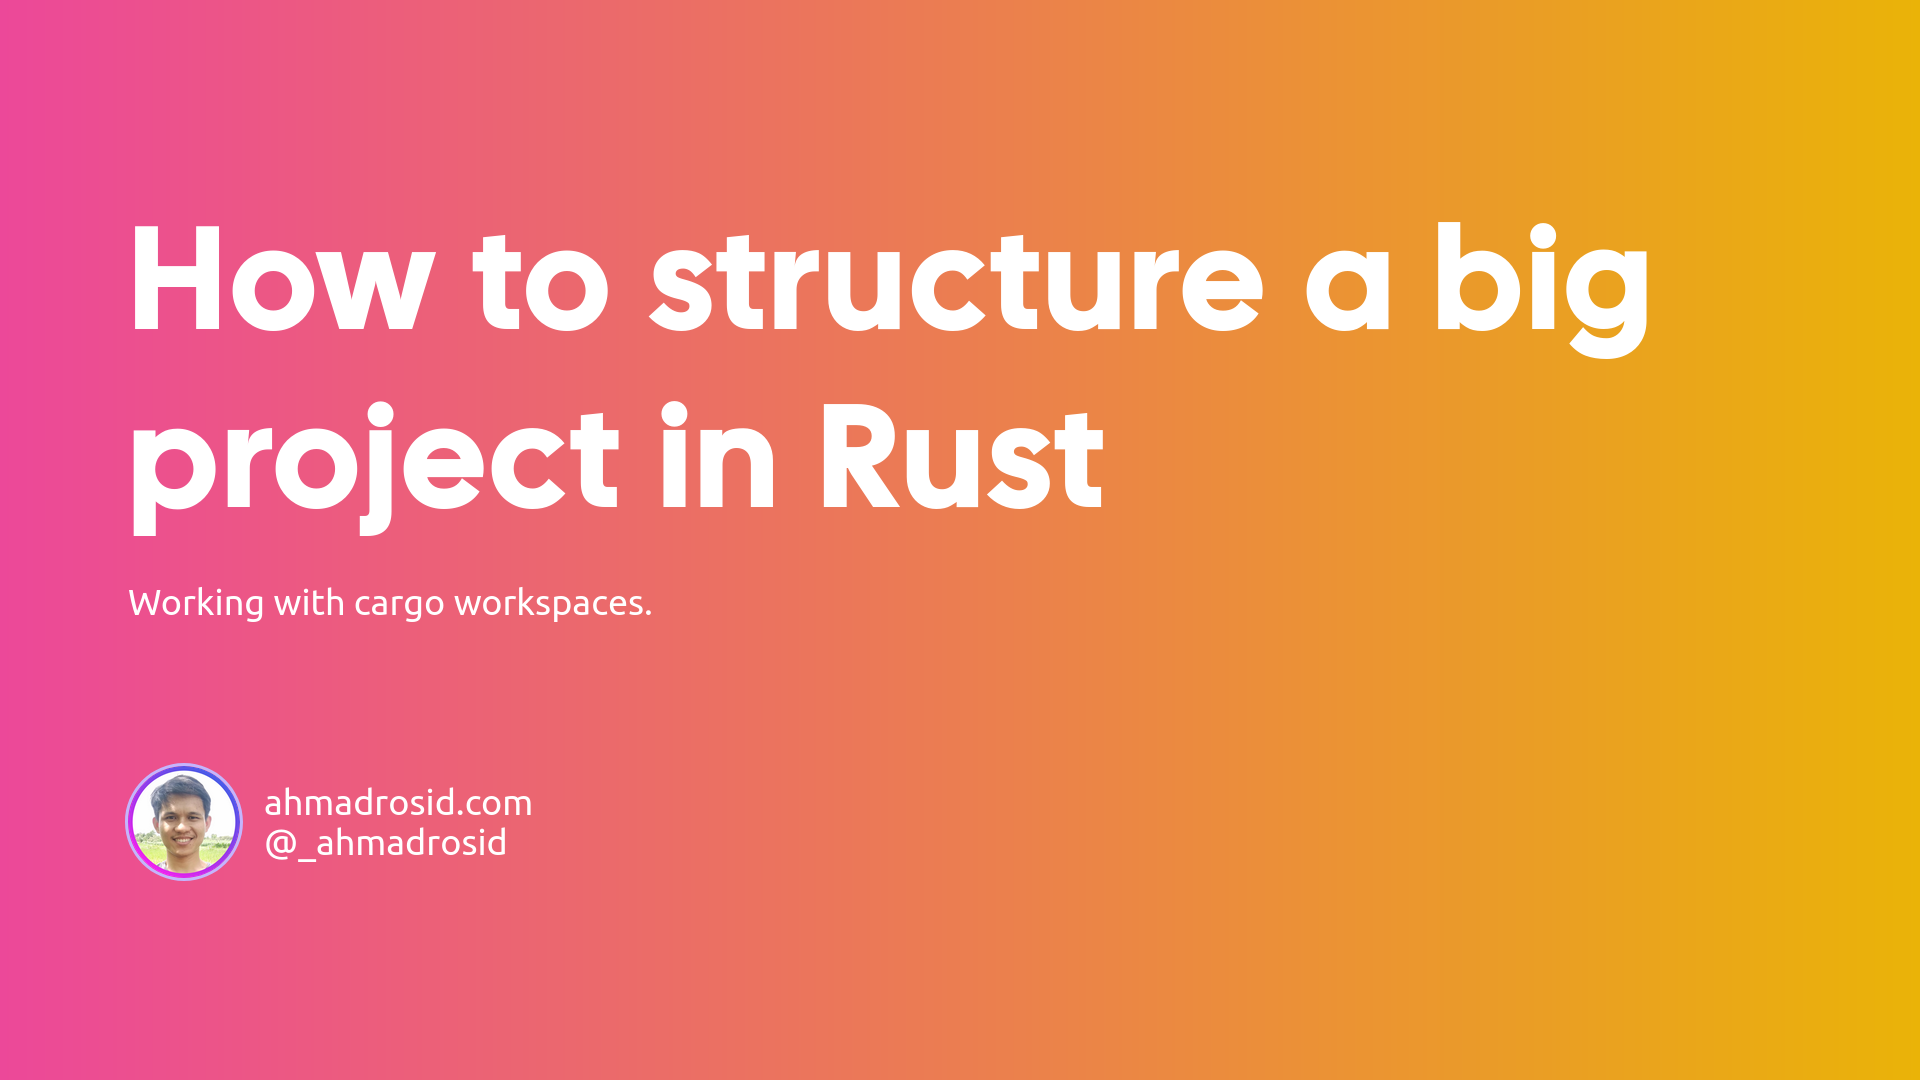 How to structure a big project in Rust